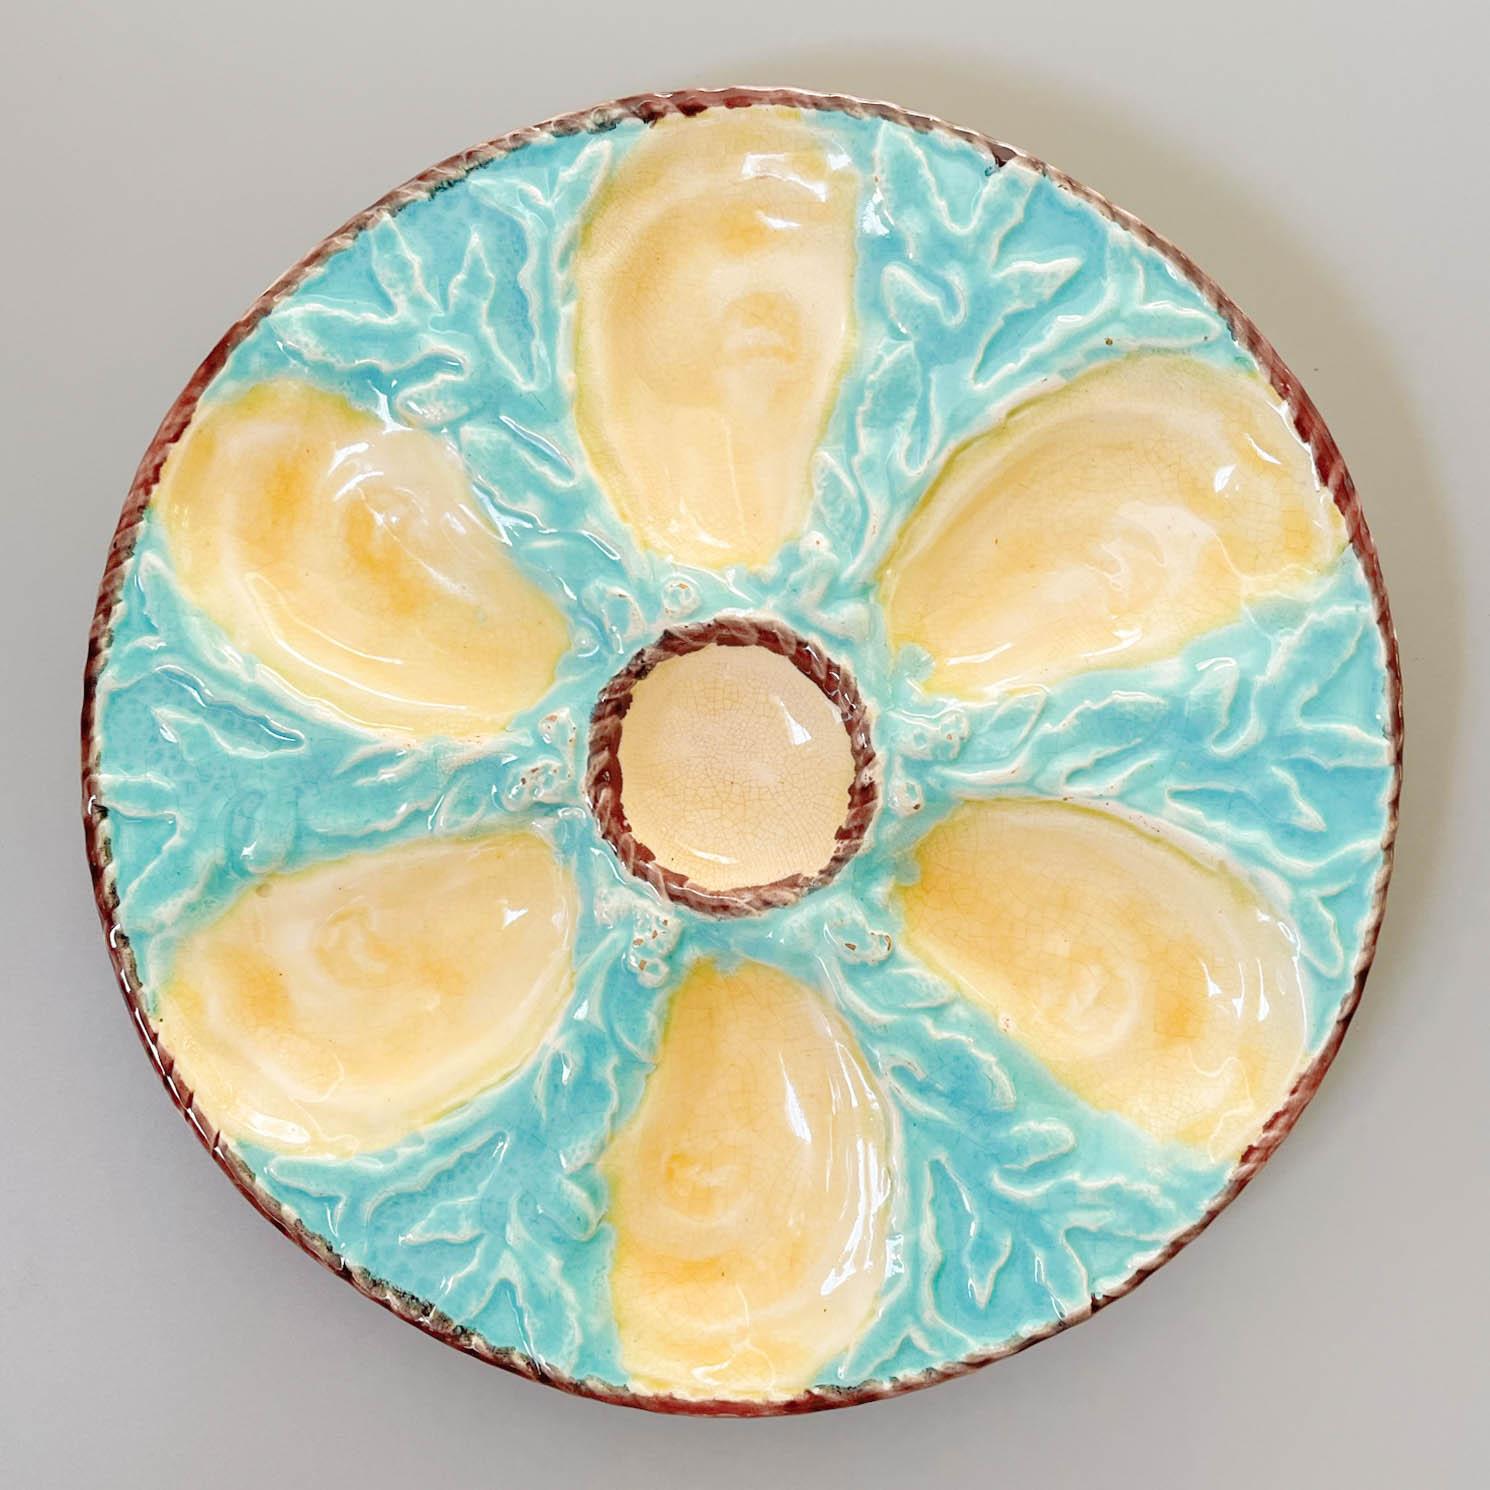 A 19th Century English glazed majolica oyster plate with six cream oyster wells surrounding a center well for sauce and with light turquoise blue ground with seaweed relief. A light brown nautical rope border encircles the center well and the outer